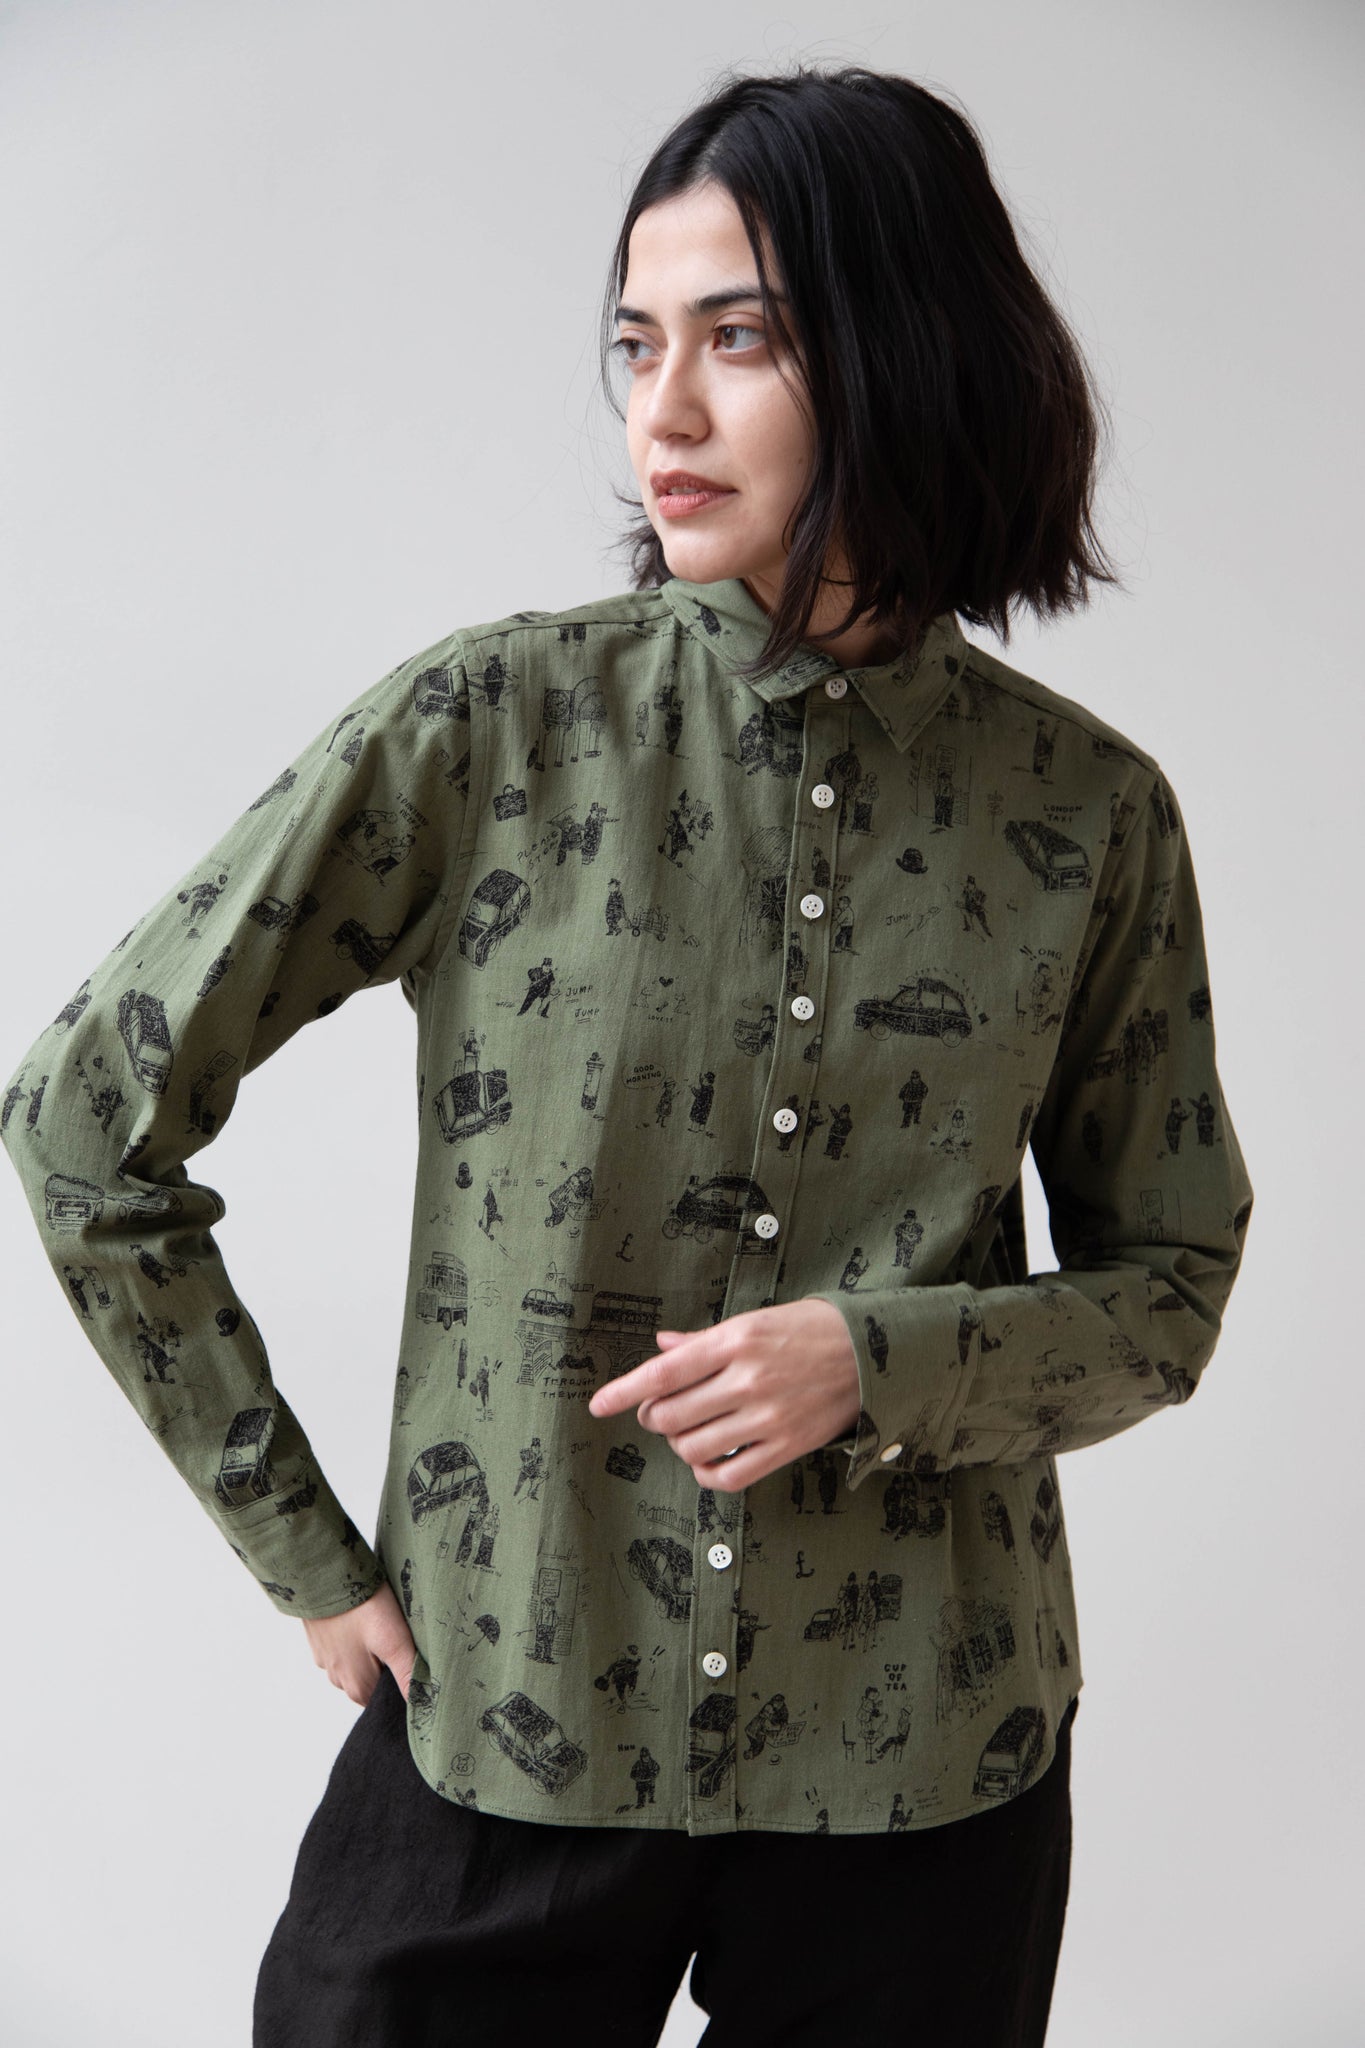 Old Man's Tailor | Small Collar Shirt in "Where is My Dog?" Print in Khaki